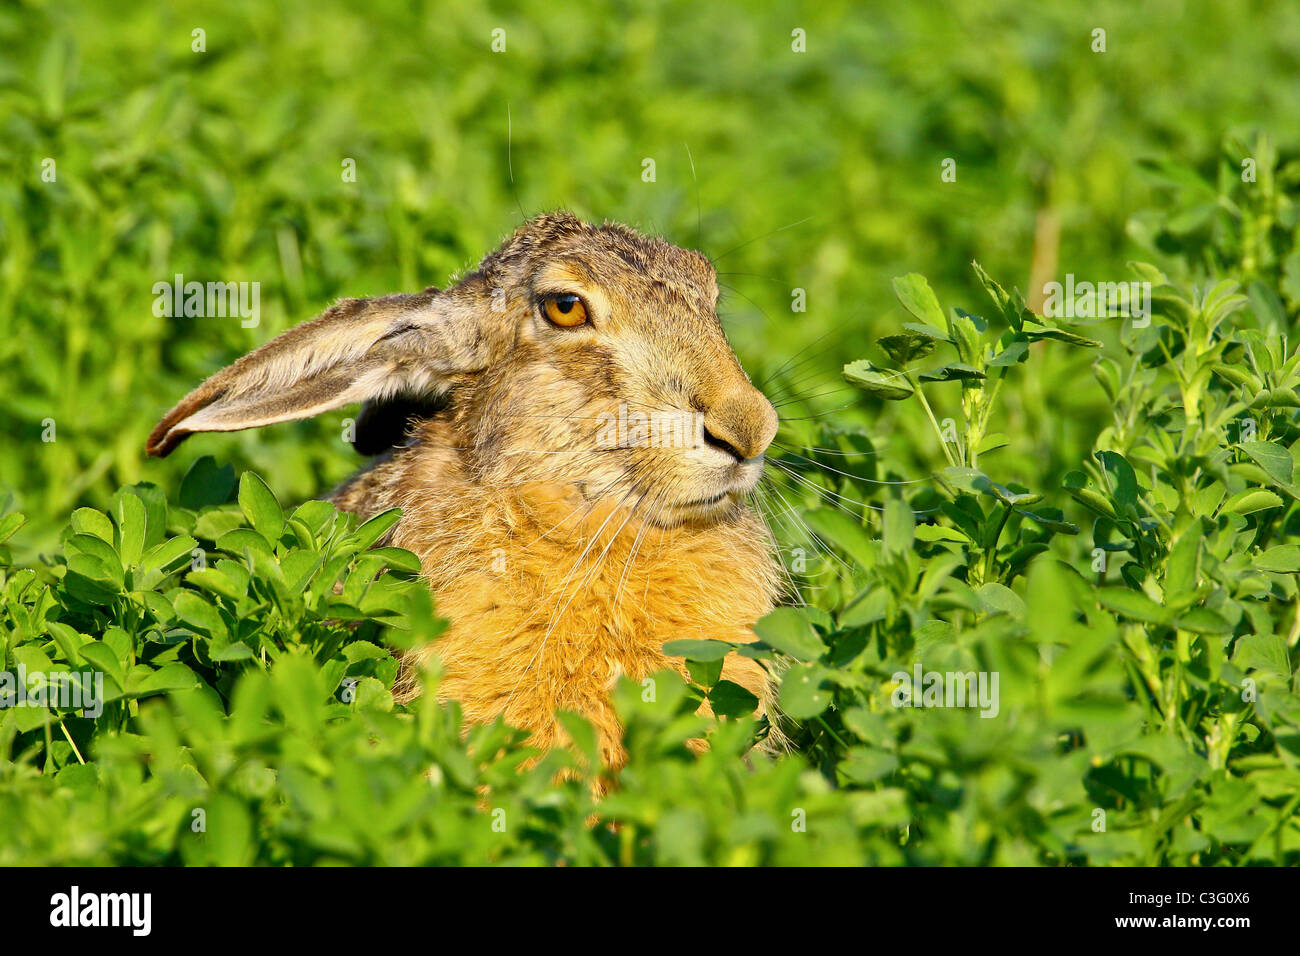 Portrait of a sitting brown hare (lepus europaeus). Stock Photo